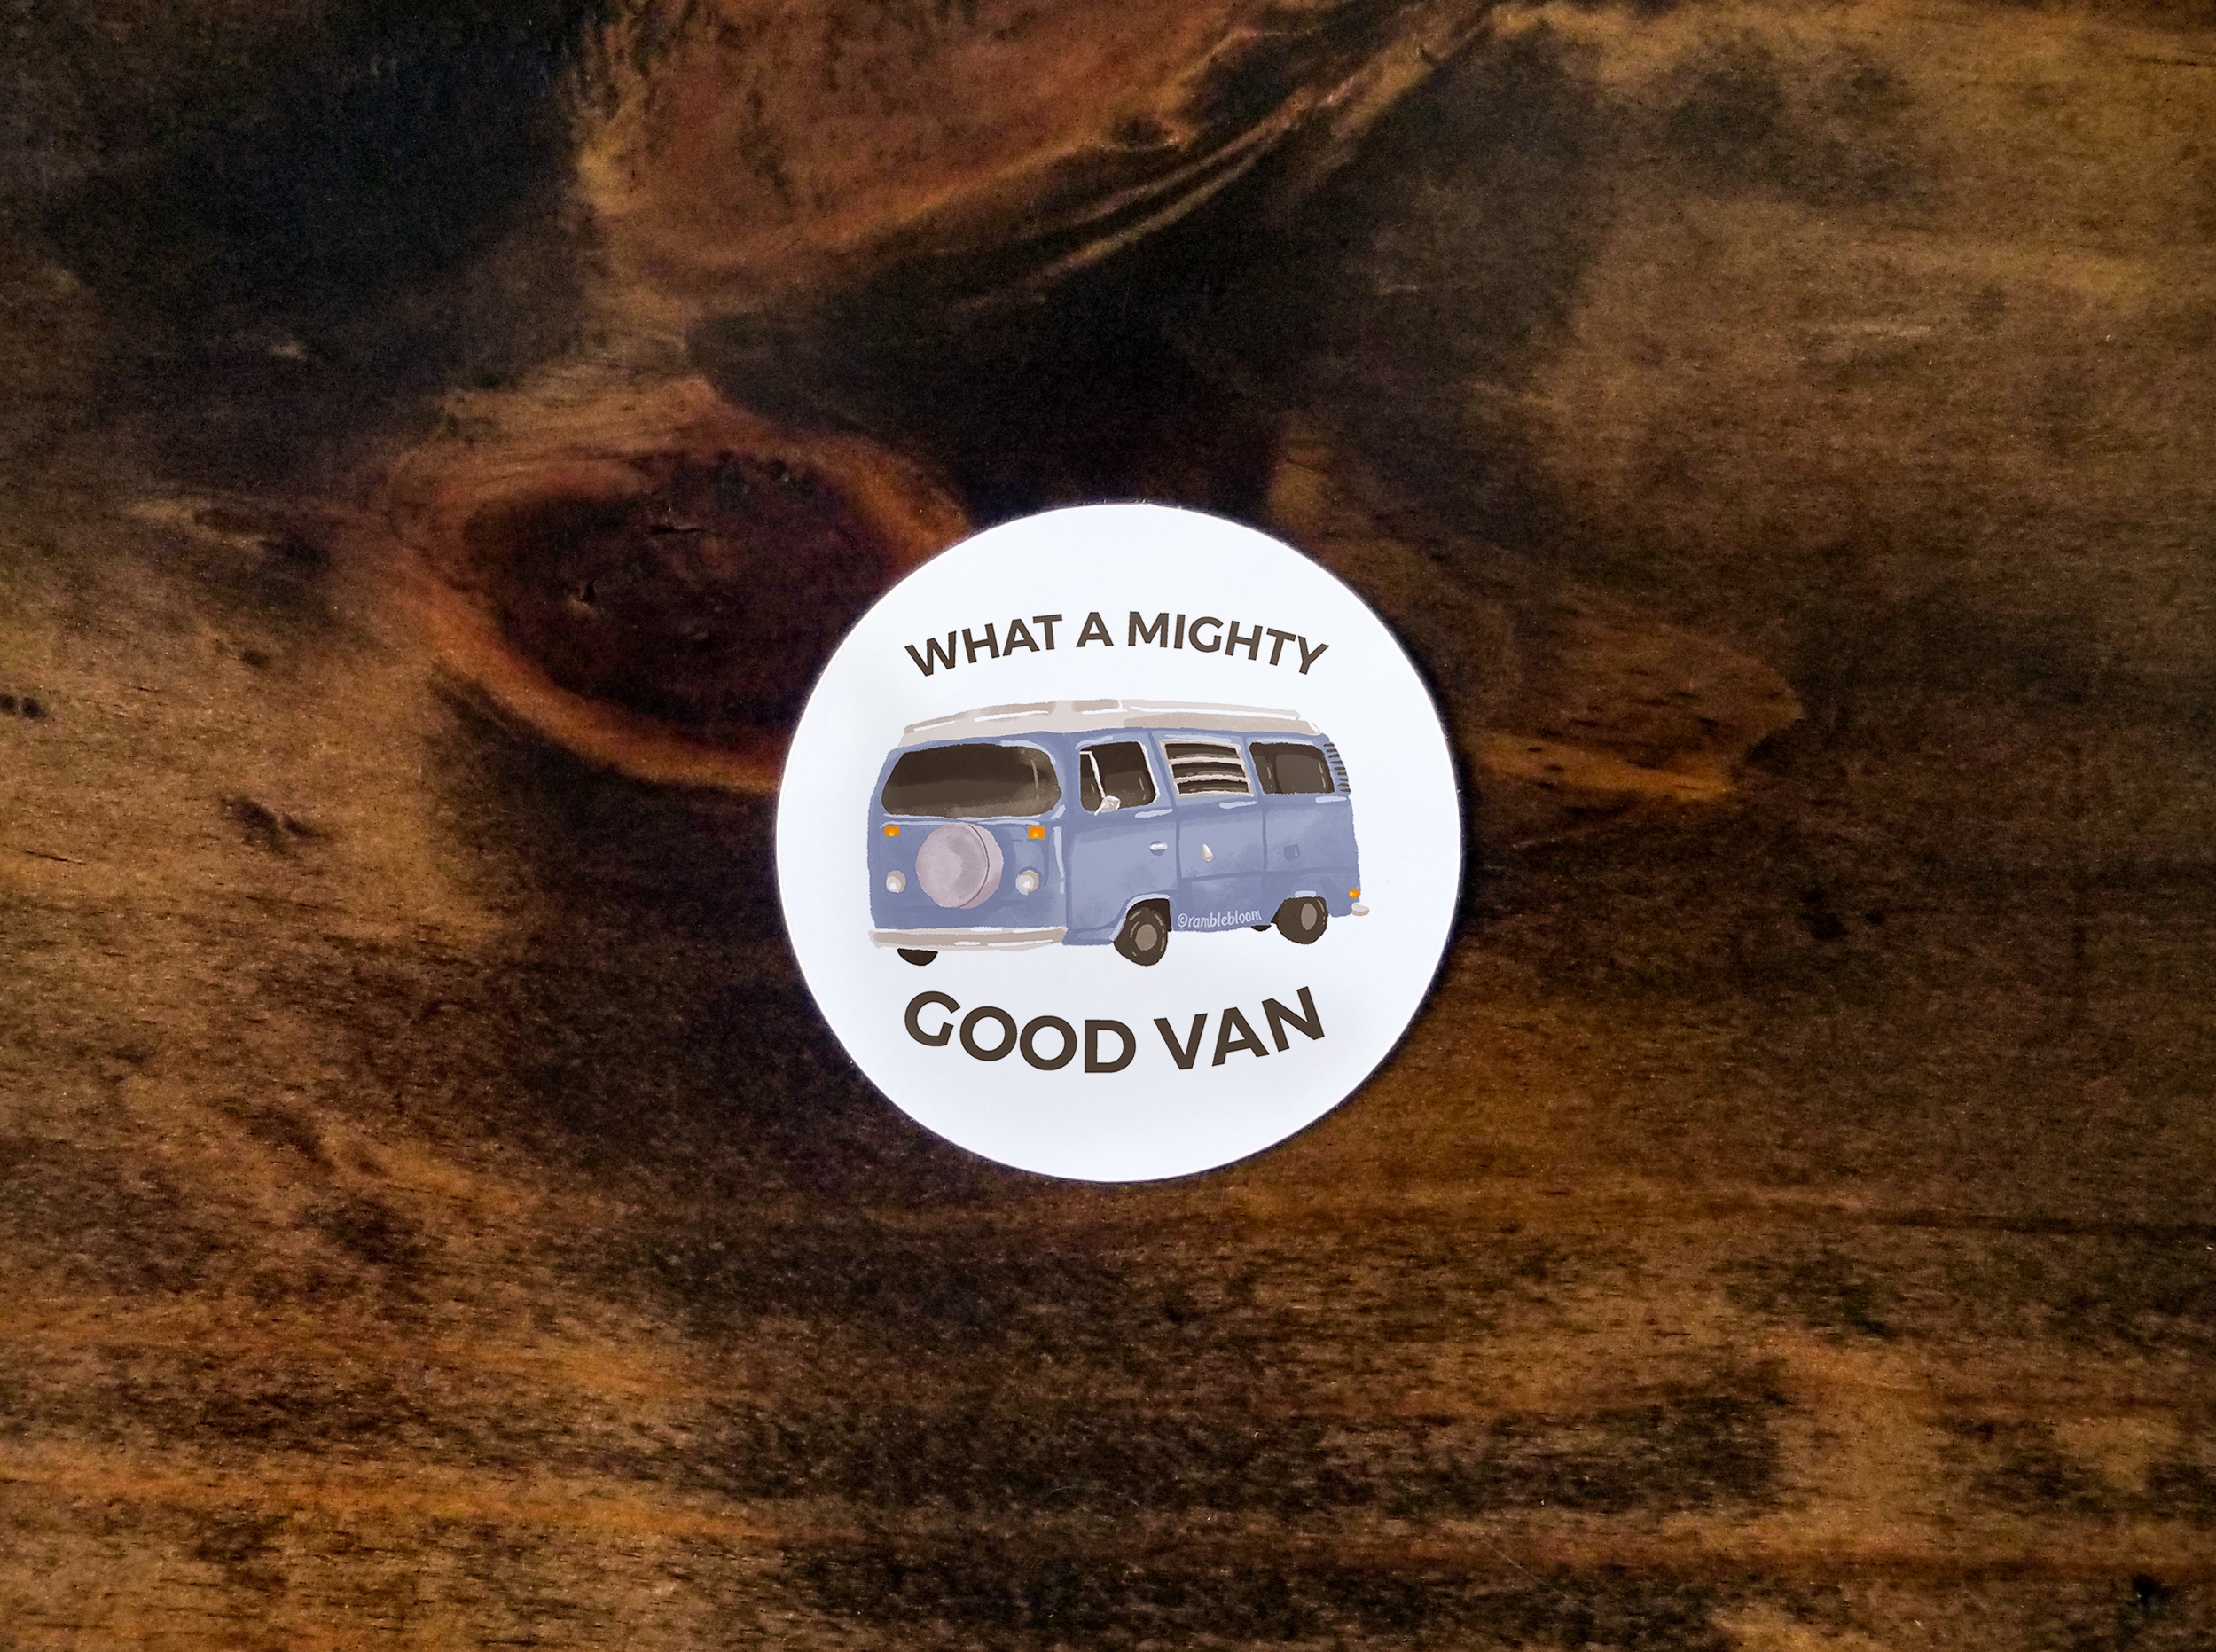 Photo of a circular sticker with the words 'What a Mighty Good Van' around a campervan illustration